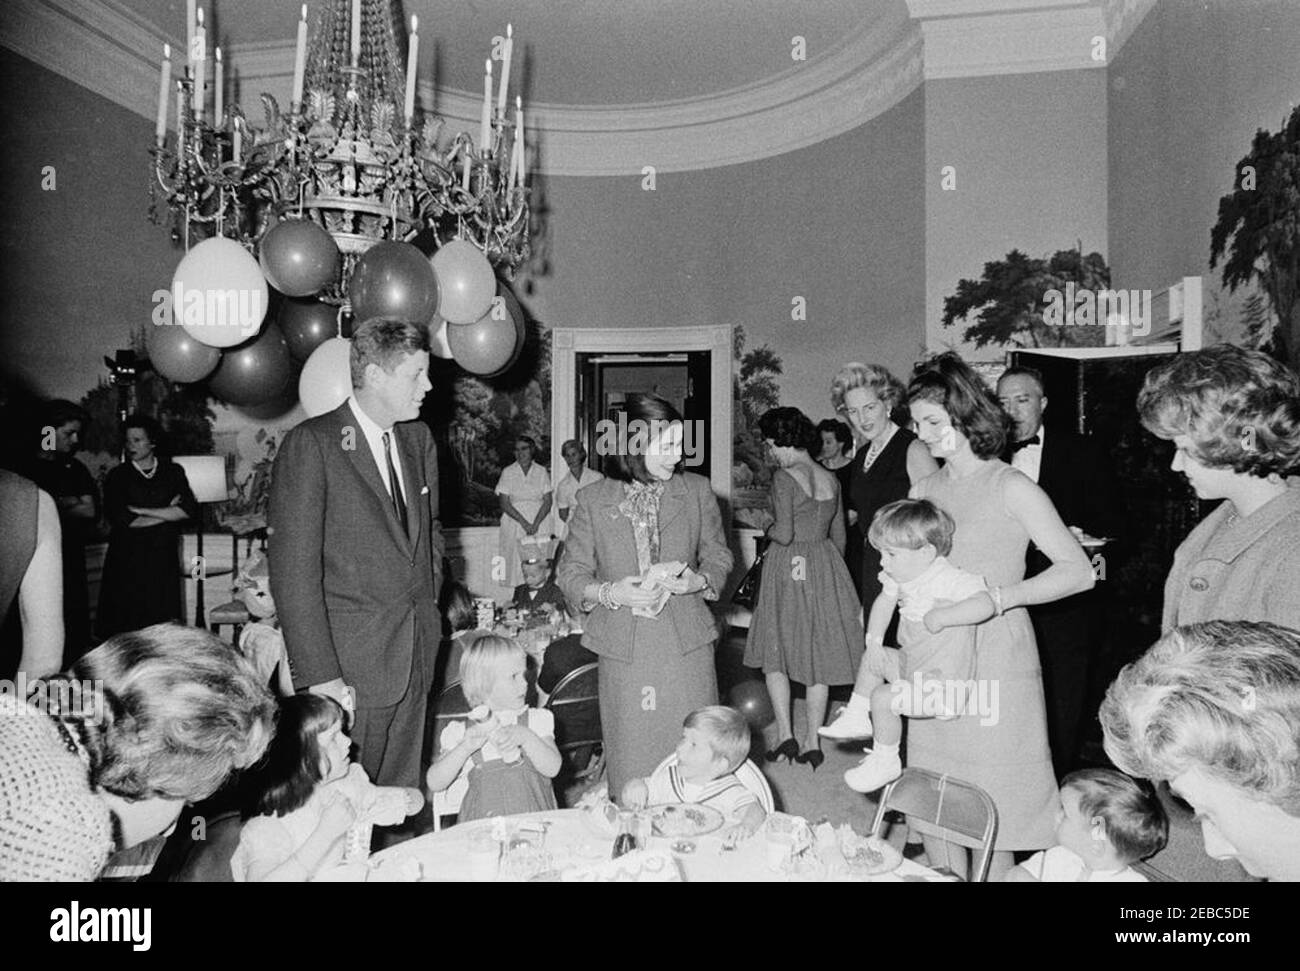 Birthday party for Caroline Kennedy and John F. Kennedy, Jr.. President John F. Kennedy and First Lady Jacqueline Kennedy attend a joint birthday party for their children, Caroline Kennedy and John F. Kennedy, Jr.; Mrs. Kennedy lifts John, Jr., at right. Also pictured: First Ladyu0027s Social Secretary, Letitia Baldrige; White House butler, John W. Ficklin. Presidentu2019s Dining Room (Residence), White House, Washington, D.C. Stock Photo